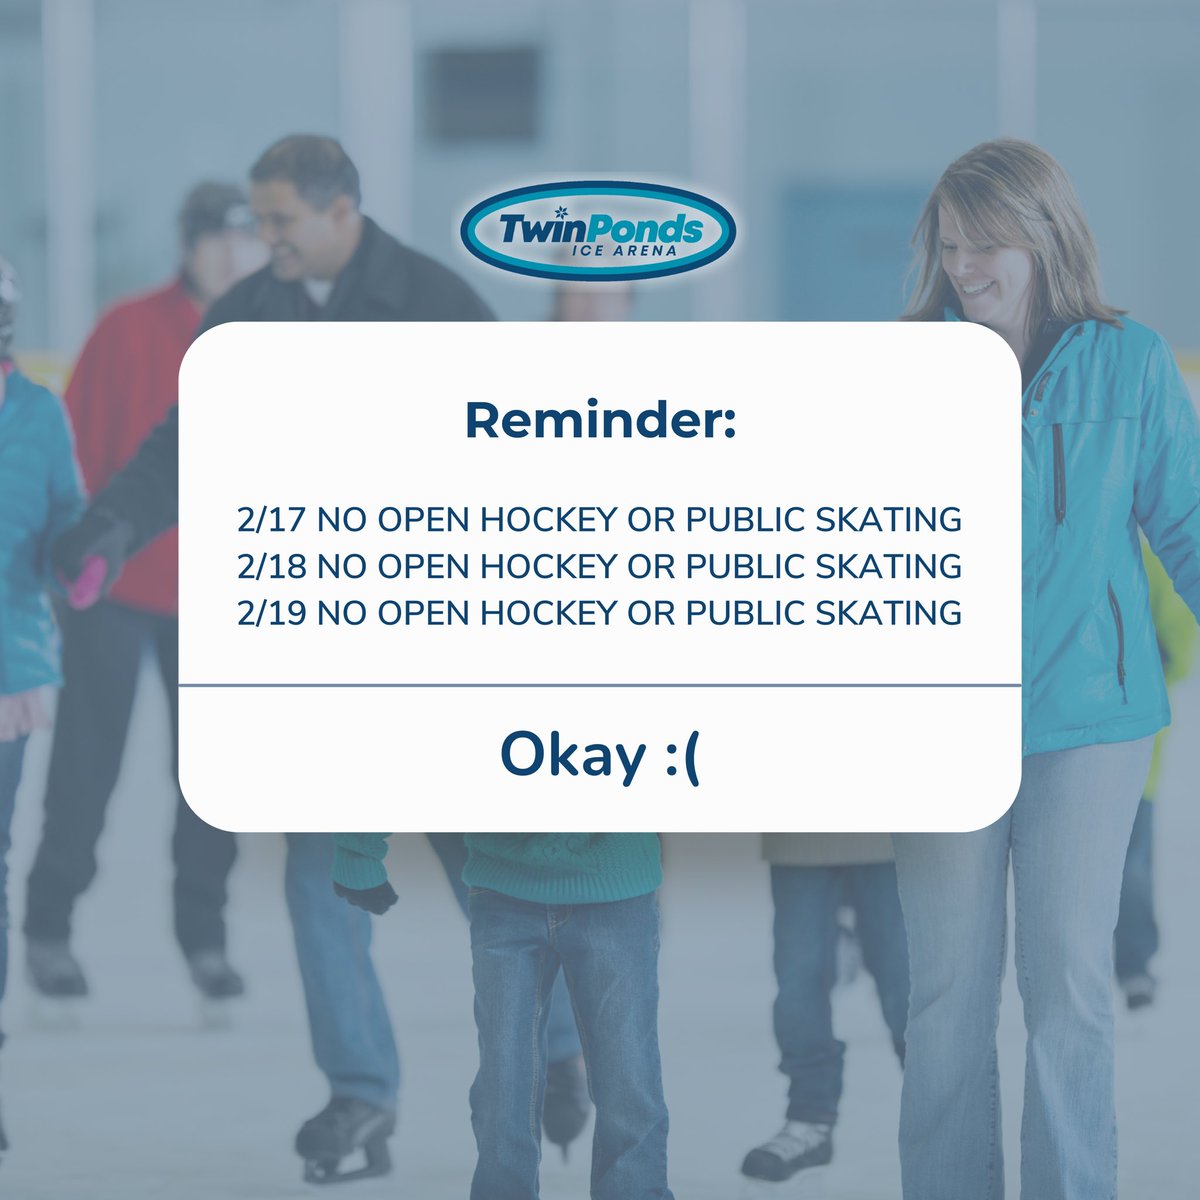 ‼️REMINDER‼️

There will be no open hockey or public skating this upcoming Saturday, Sunday, and Monday! #TwinPondsIceArena #HarrisburgPa #publicskating